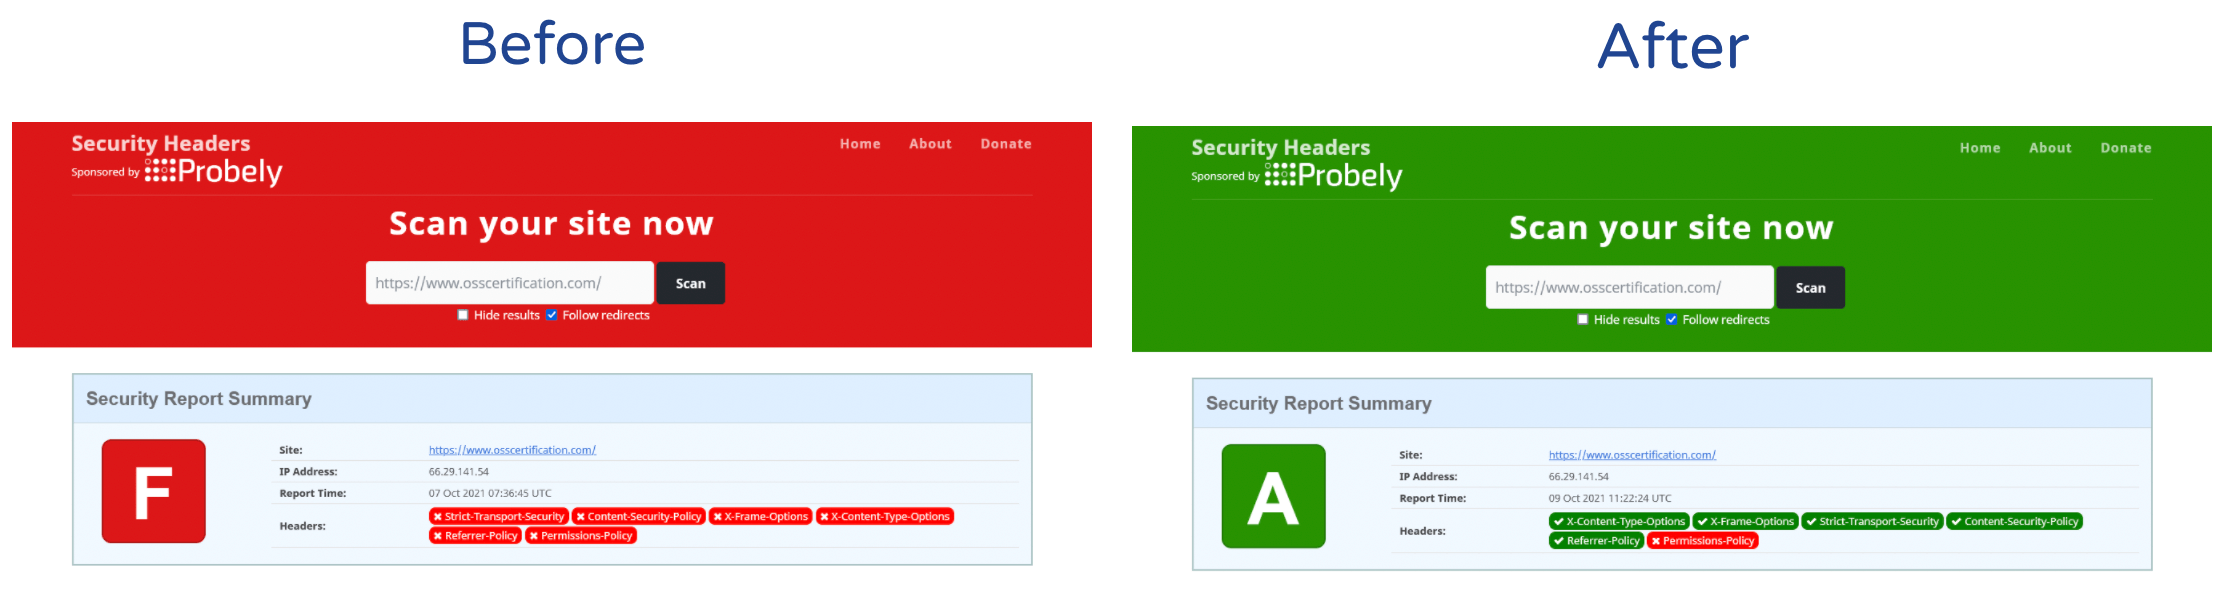 Security rating improved